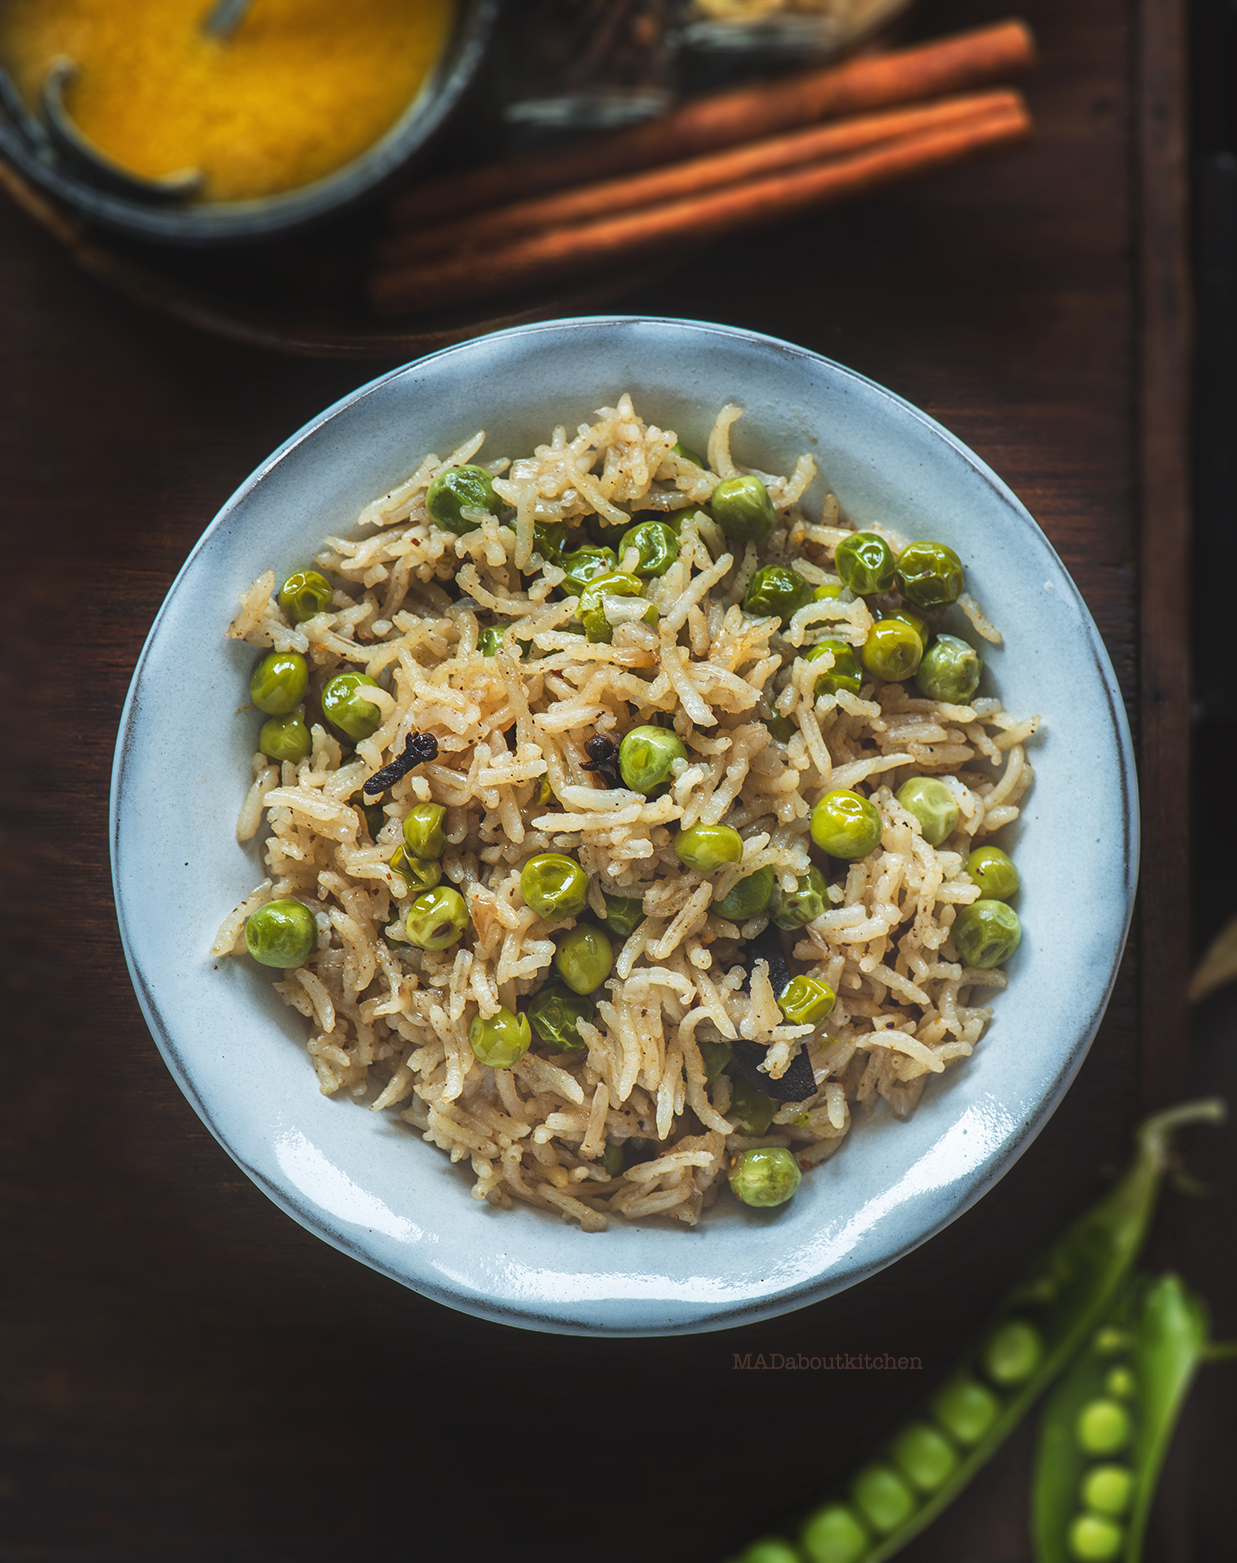 Matarwaale Chawal or Peas pulav is a basic, simple, comforting, basic rice dish that is not only one pot but is ready in 20mins start to end.